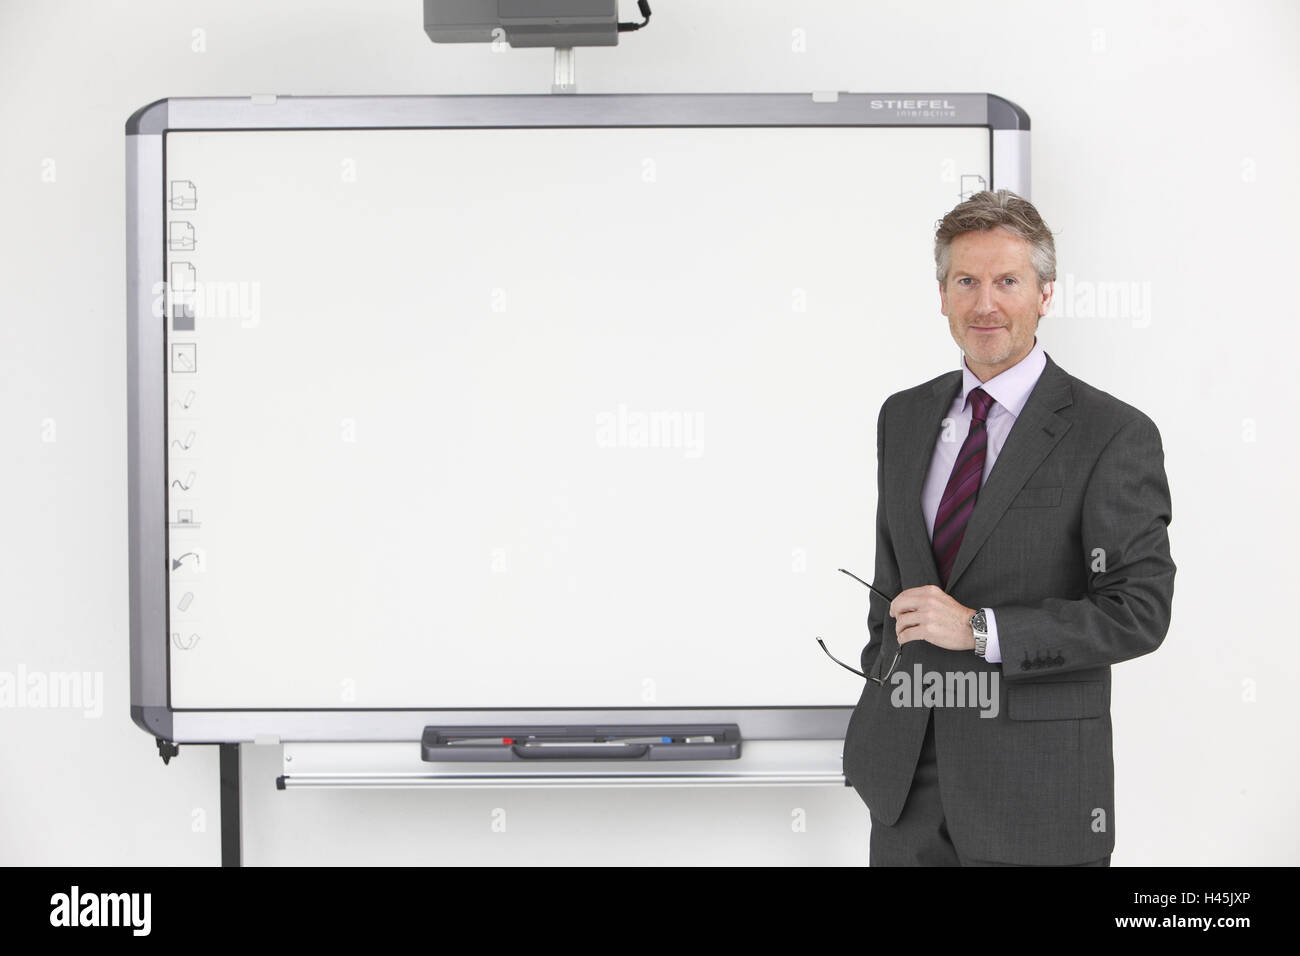 Man, 50 +, manager, Whiteboard, Stock Photo